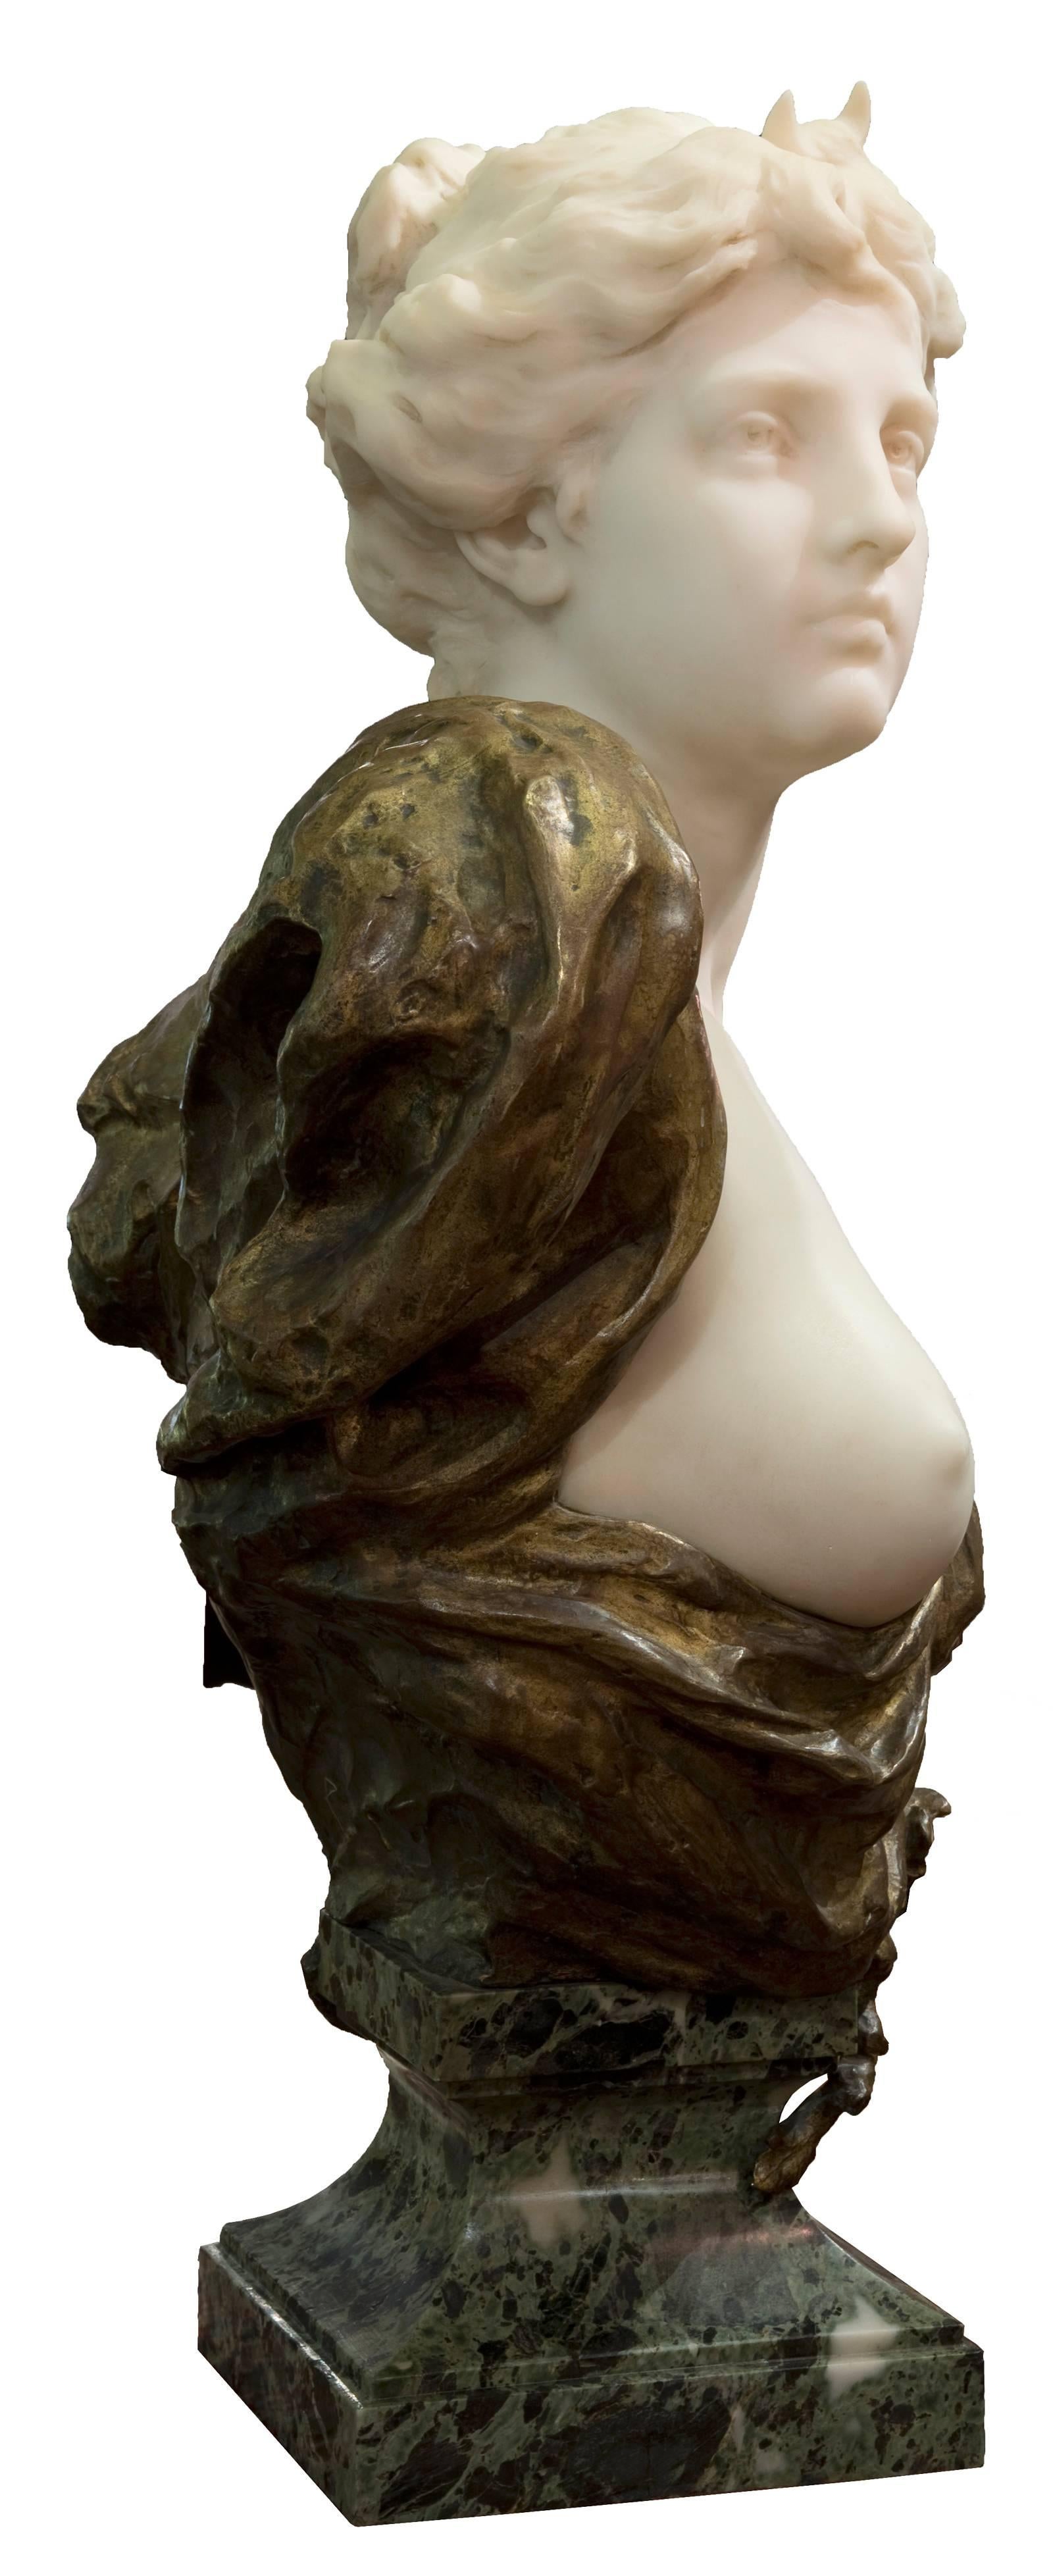 European 19th Century French Ormolu and White Marble Bust of Diana by Henri Weigéle